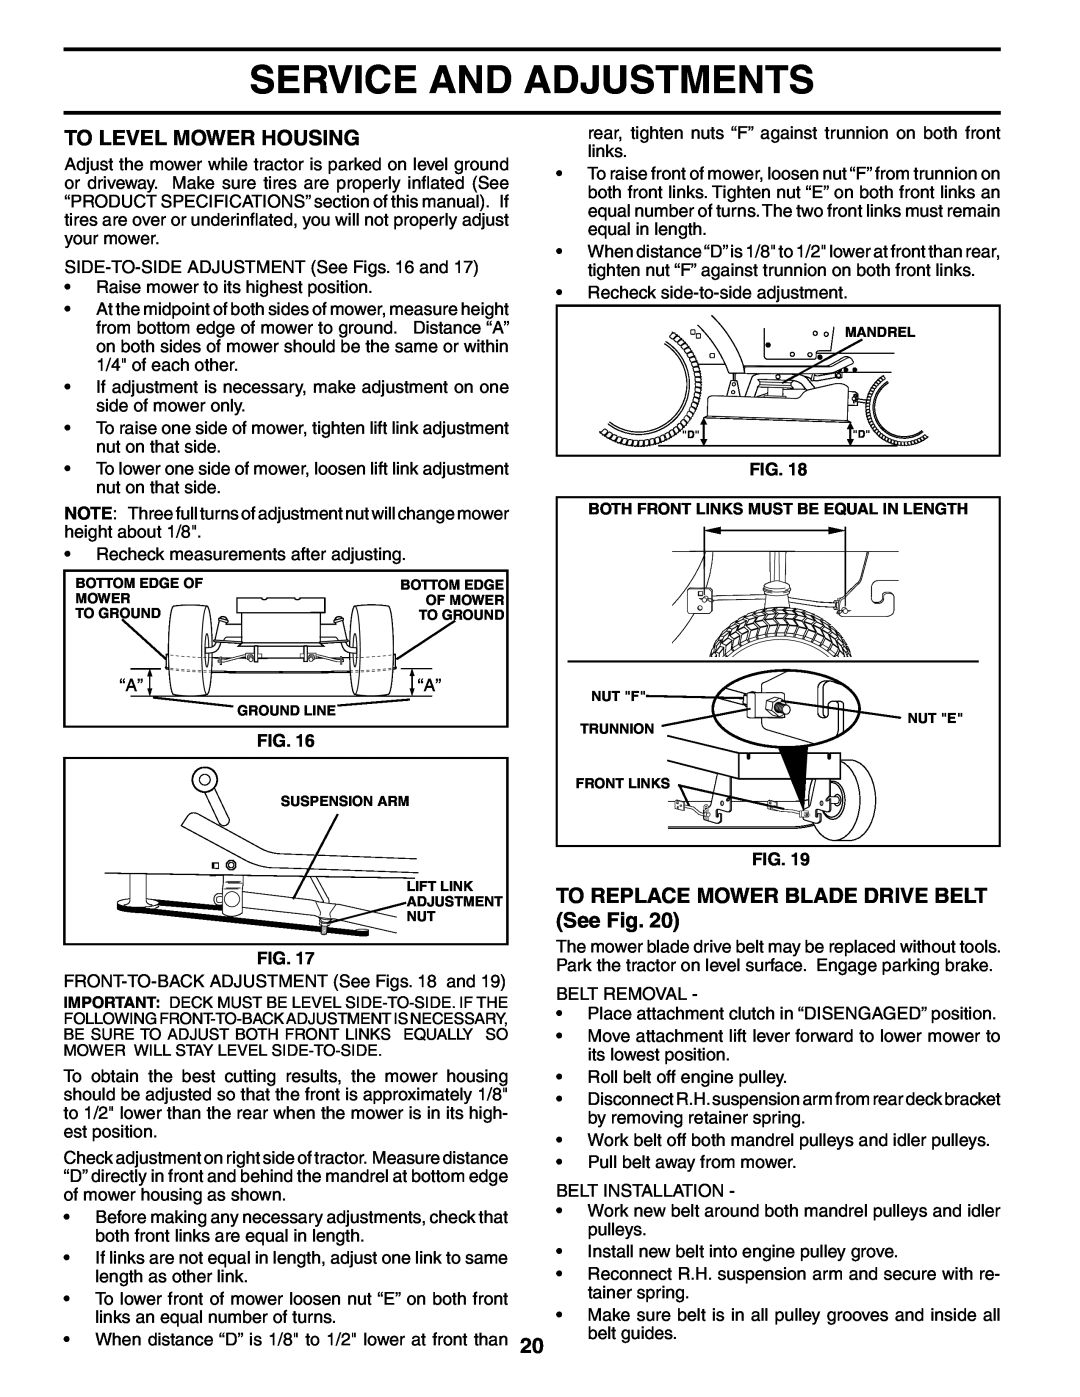 Poulan 954570932, 186888 manual To Level Mower Housing, TO REPLACE MOWER BLADE DRIVE BELT See Fig, Service And Adjustments 